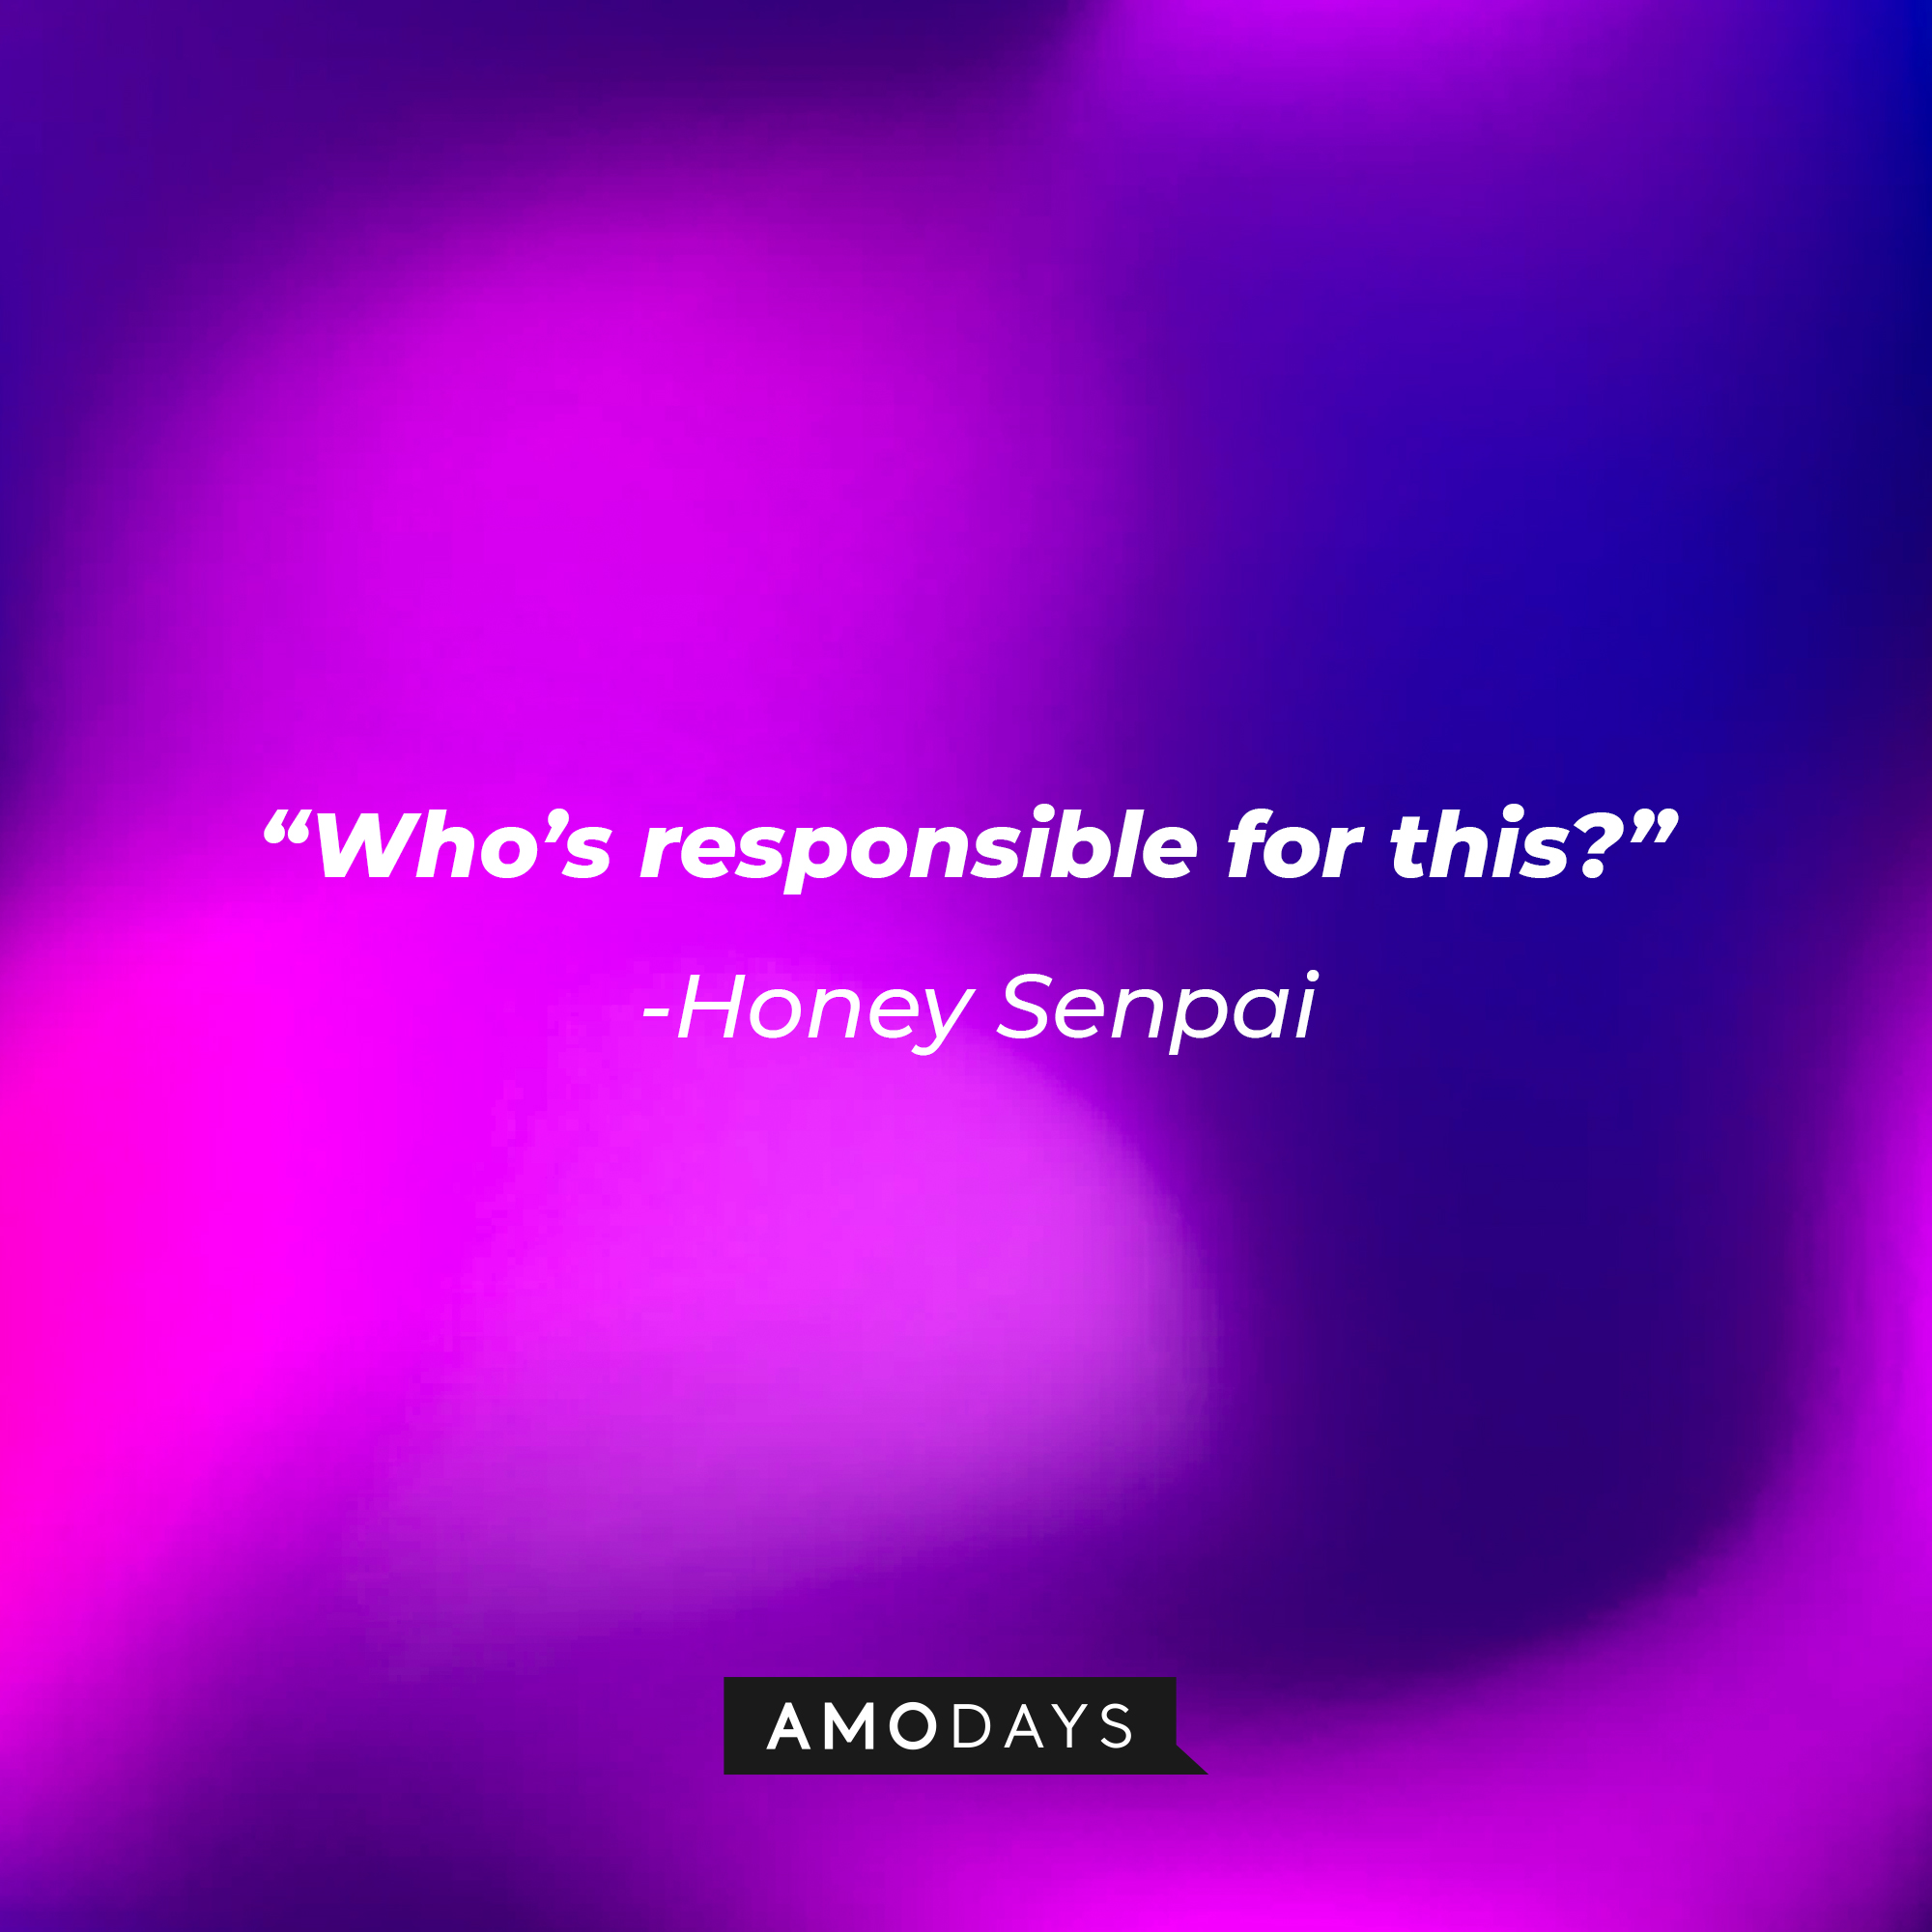 Honey Senpai’s quote: “Whose responsible for this?” | Source: AmoDays